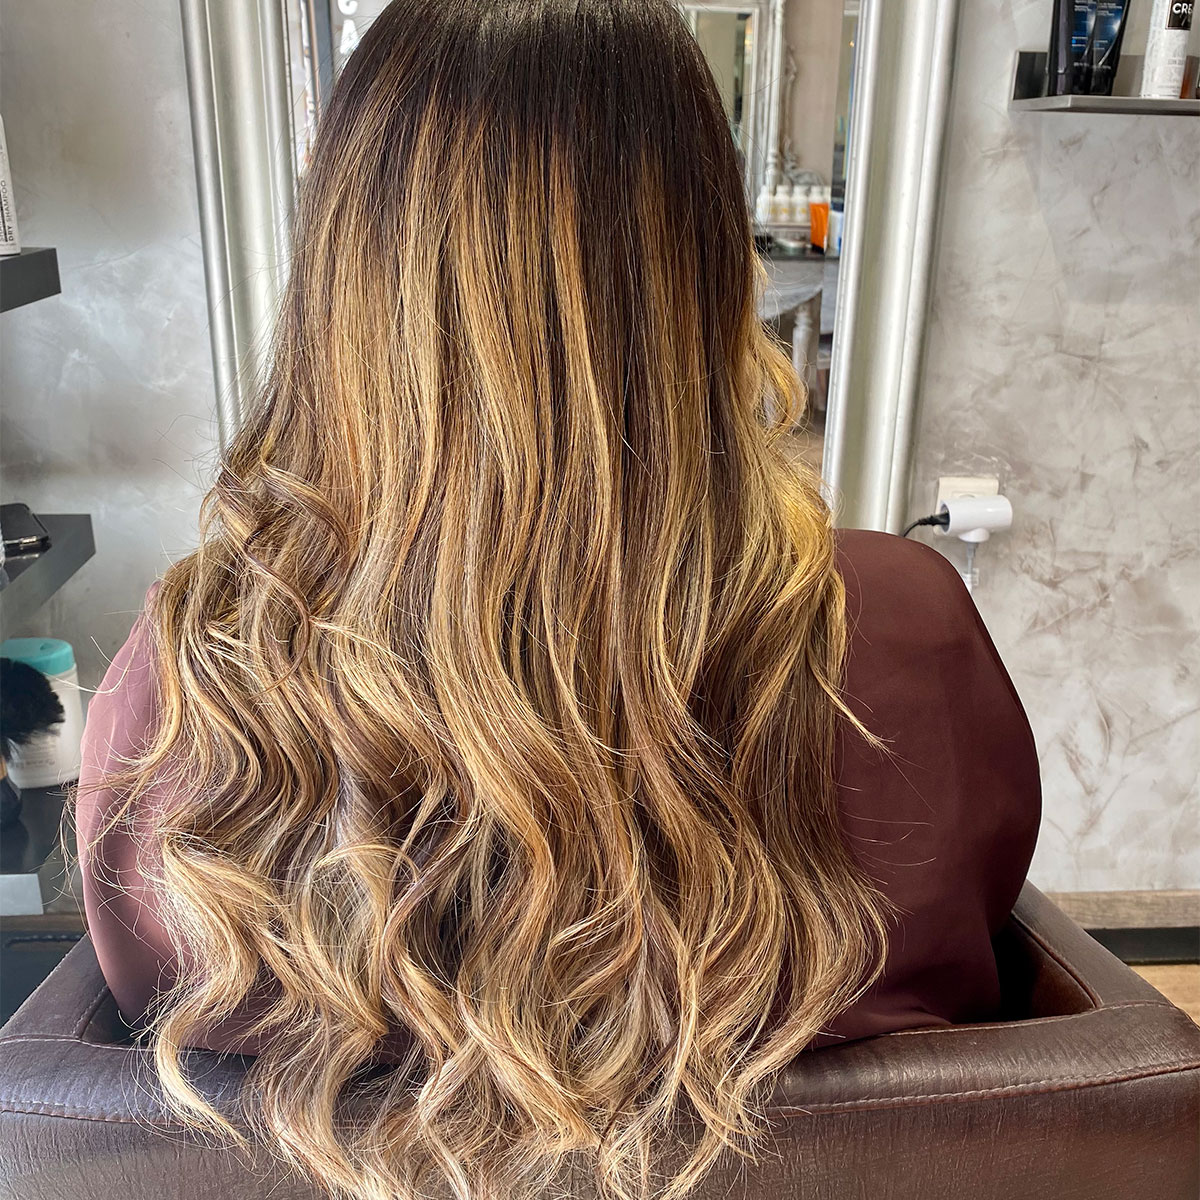 /images/coiffeur-six-fours/balayage-cheveux-six-fours-plages.jpg